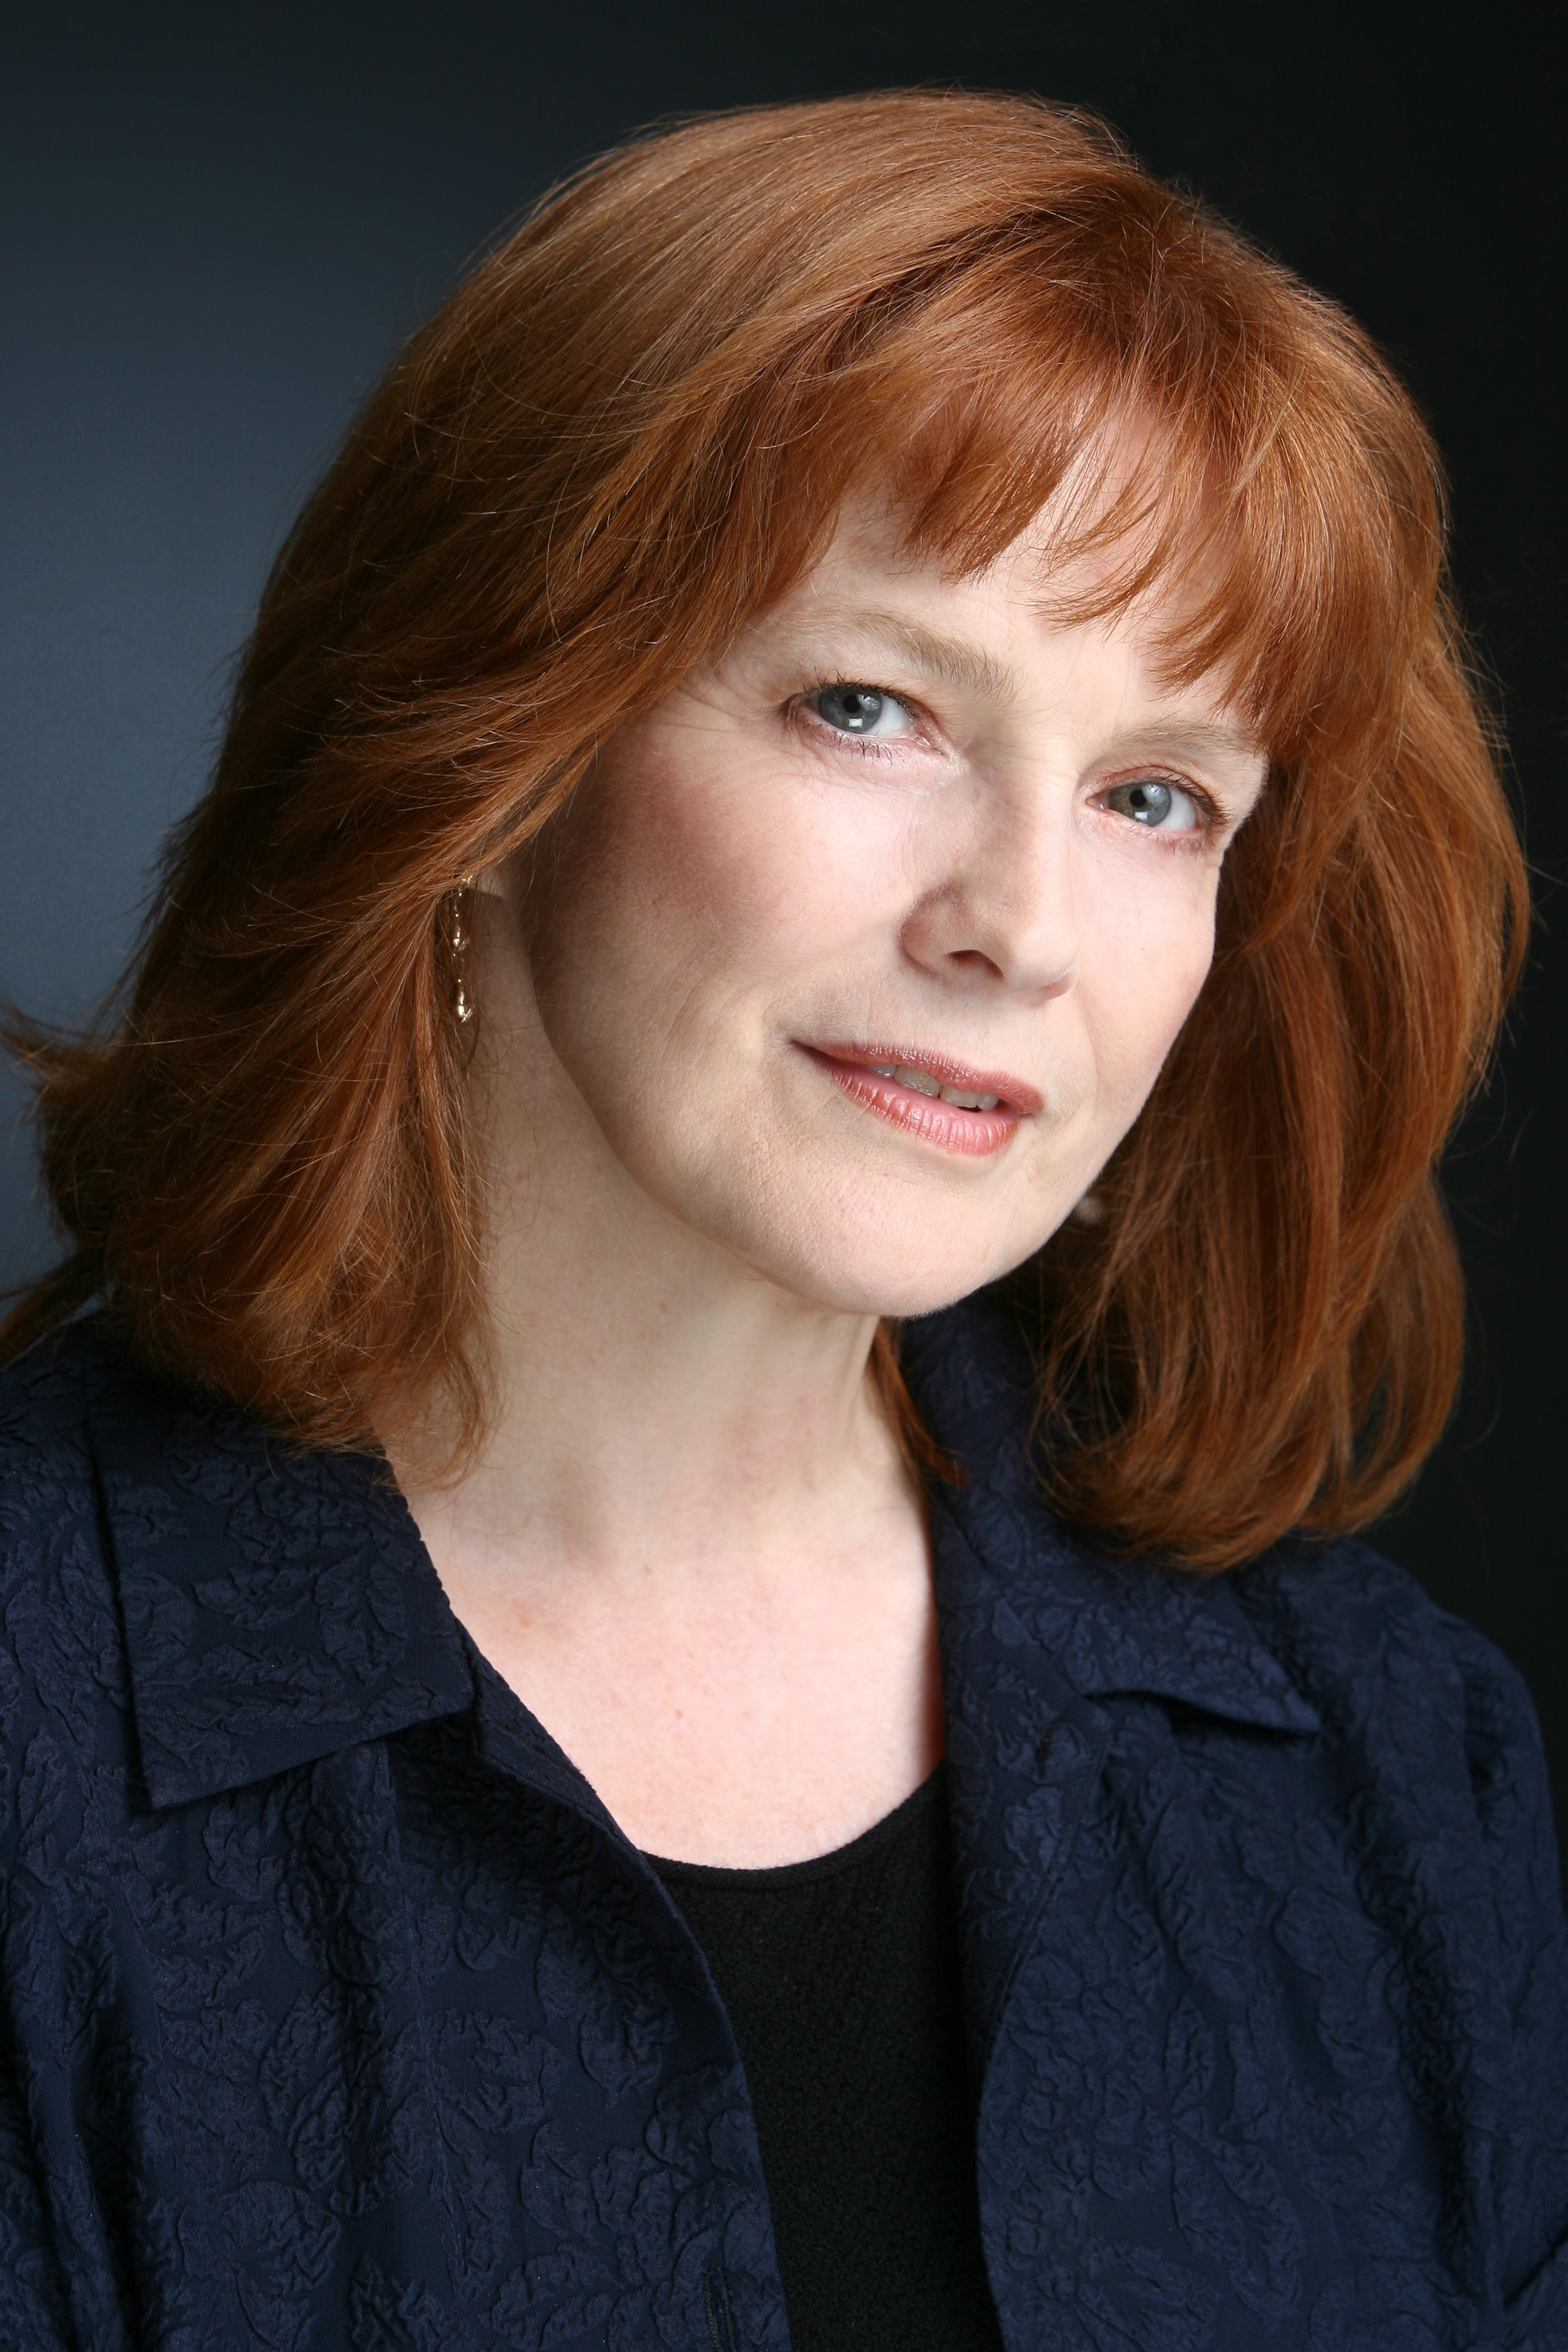 Tony Award-Winner Blair Brown Joins MARY PAGE MARLOWE (Mar 31 - May 29) 1 Steppenwolf Theatre Company announced today acclaimed stage and screen actor Blair Brown will join the cast of Mary Page Marlowe as one of the seven actors sharing the role of Mary over the span of her life. Brown is well-known for her prolific Broadway career, including her Tony Award-winning turn in the play Copenhagen. She played the title character in the TV series, The Days and Nights of Molly Dodd, for which she received five consecutive Emmy Award nominations. She earned a Golden Globe nomination for her portrayal of ‘Jacqueline Kennedy’ in the miniseries Kennedy. Most recently she played ‘Nina Sharp’ on the FOX series, Fringe. She replaces Lindsay Crouse who left the cast due to personal reasons. The seven actors sharing the title role are:Blair Brown (Mary at ages 59, 63 and 69); Carrie Coon (Mary at ages 27 and 36); Laura T. Fisher(Mary at age 50); Caroline Heffernan (Mary at age 12); Annie Munch (Mary at age 19); Rebecca Spence (Mary at ages 40 and 44) with the final Mary to be played by three infants who will rotate in the role: Benicio Calderone, Charlotte Freund and Sebastian White. Completing the cast are ensemble members Ian Barford (Ray) and Alan Wilder (Andy) with Stephen Cefalu, Jr. (Ed Marlowe), Amanda Drinkall (Roberta Marlowe), Jack Edwards (Louis Gilbert),Kirsten Fitzgerald (Shrink), Tess Frazer (Lorna), Keith Gallagher (Ben), Sandra Marquez (Nurse),Ariana Venturi (Connie), Madeline Weinstein (Wendy Gilbert) and Gary Wilmes (Dan).